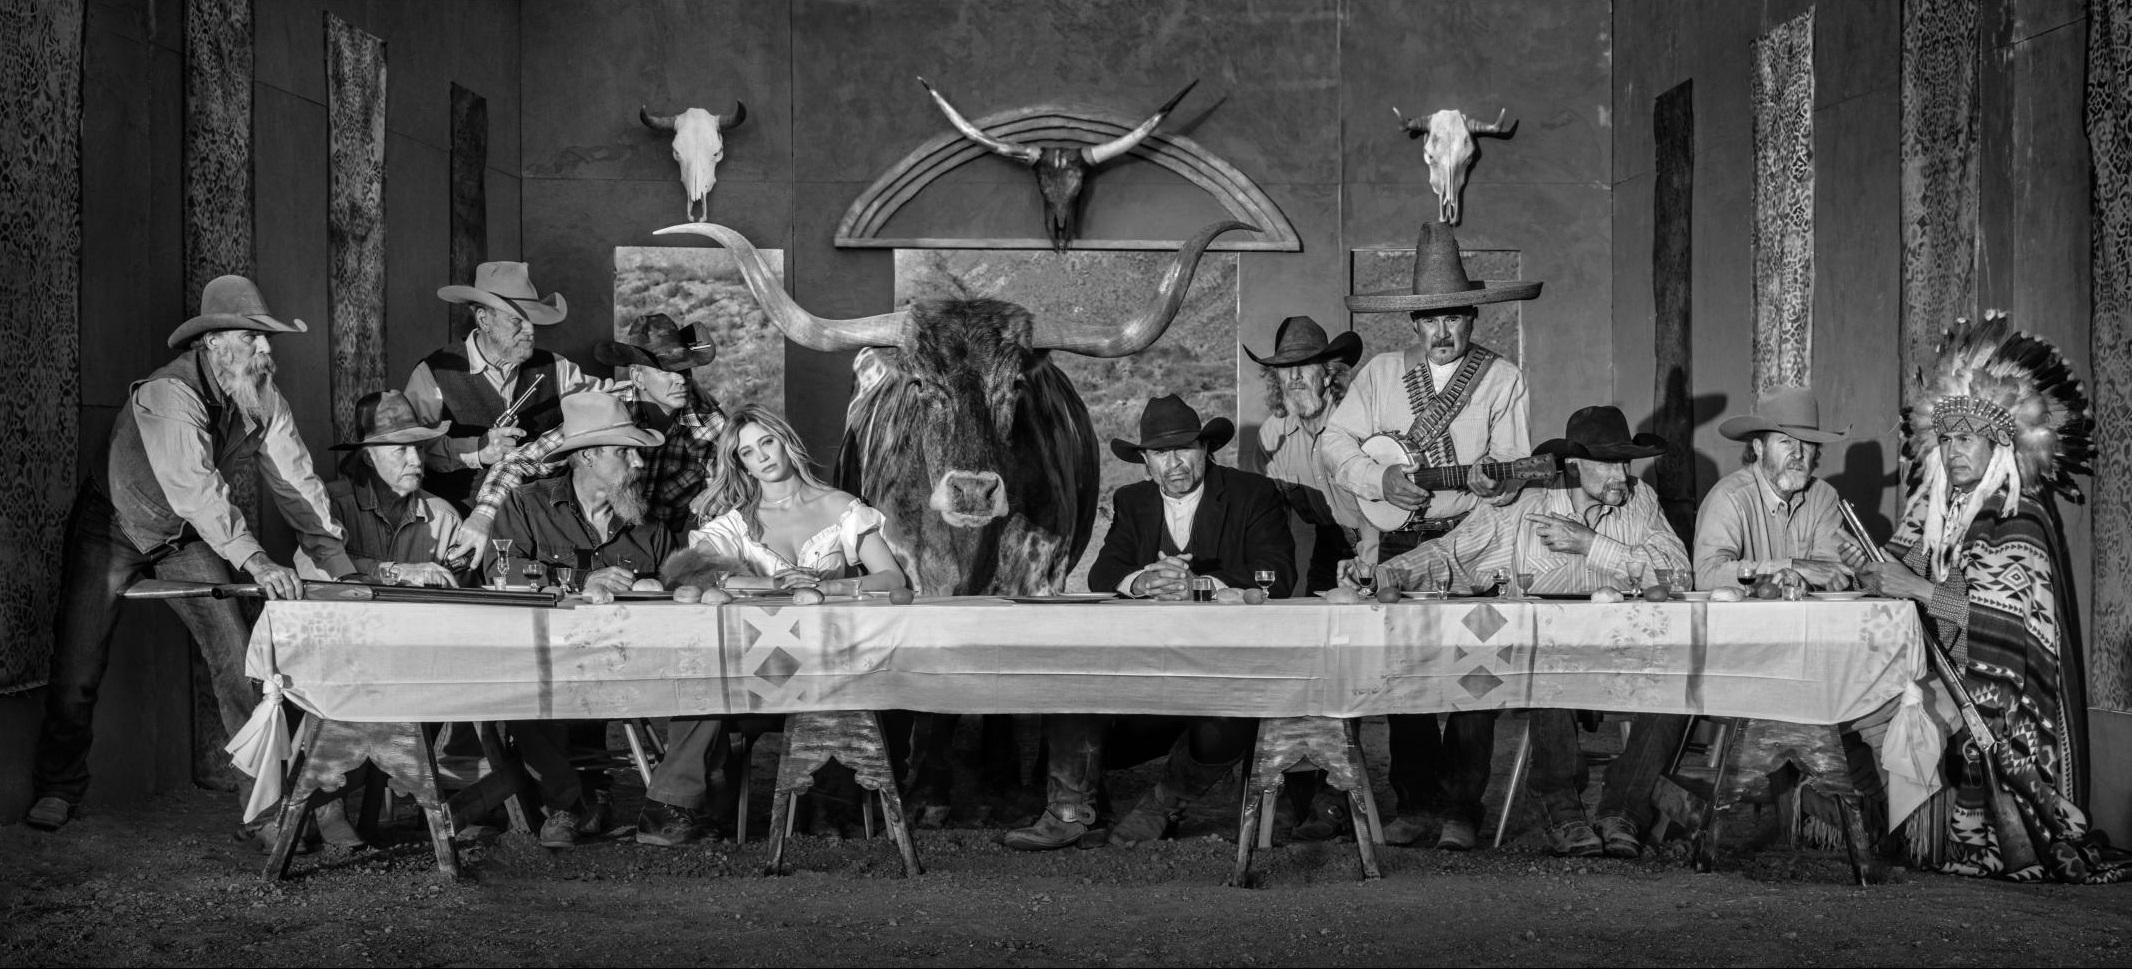 David Yarrow Black and White Photograph - The Last Supper in Texas